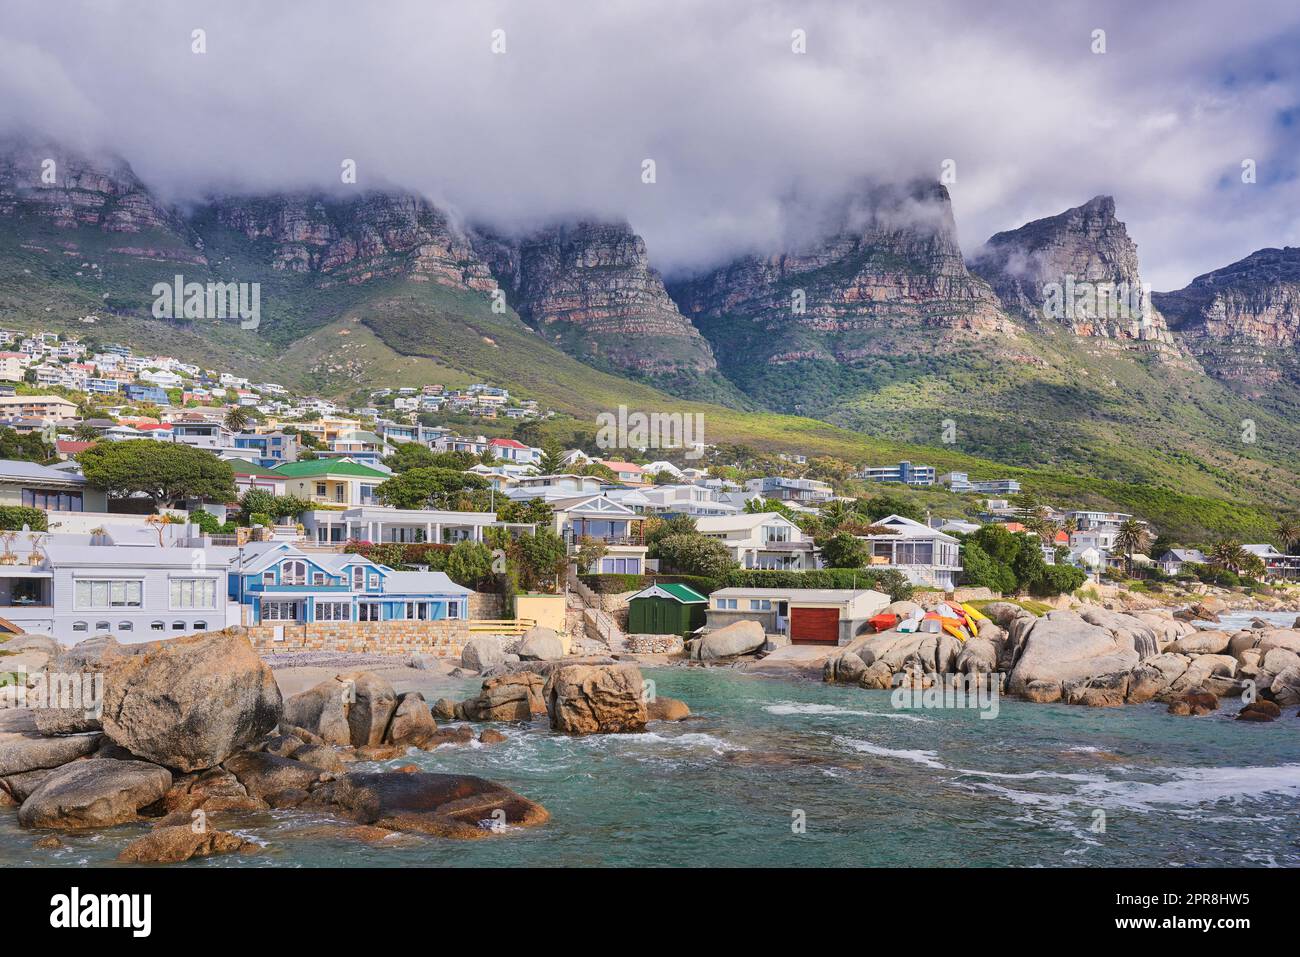 Landscape view of a seaside town along the mountain on a cloudy day in Cape Town, South Africa. Scenic view of a quiet and secluded residential area on the coast for tourists and holidays in summer Stock Photo